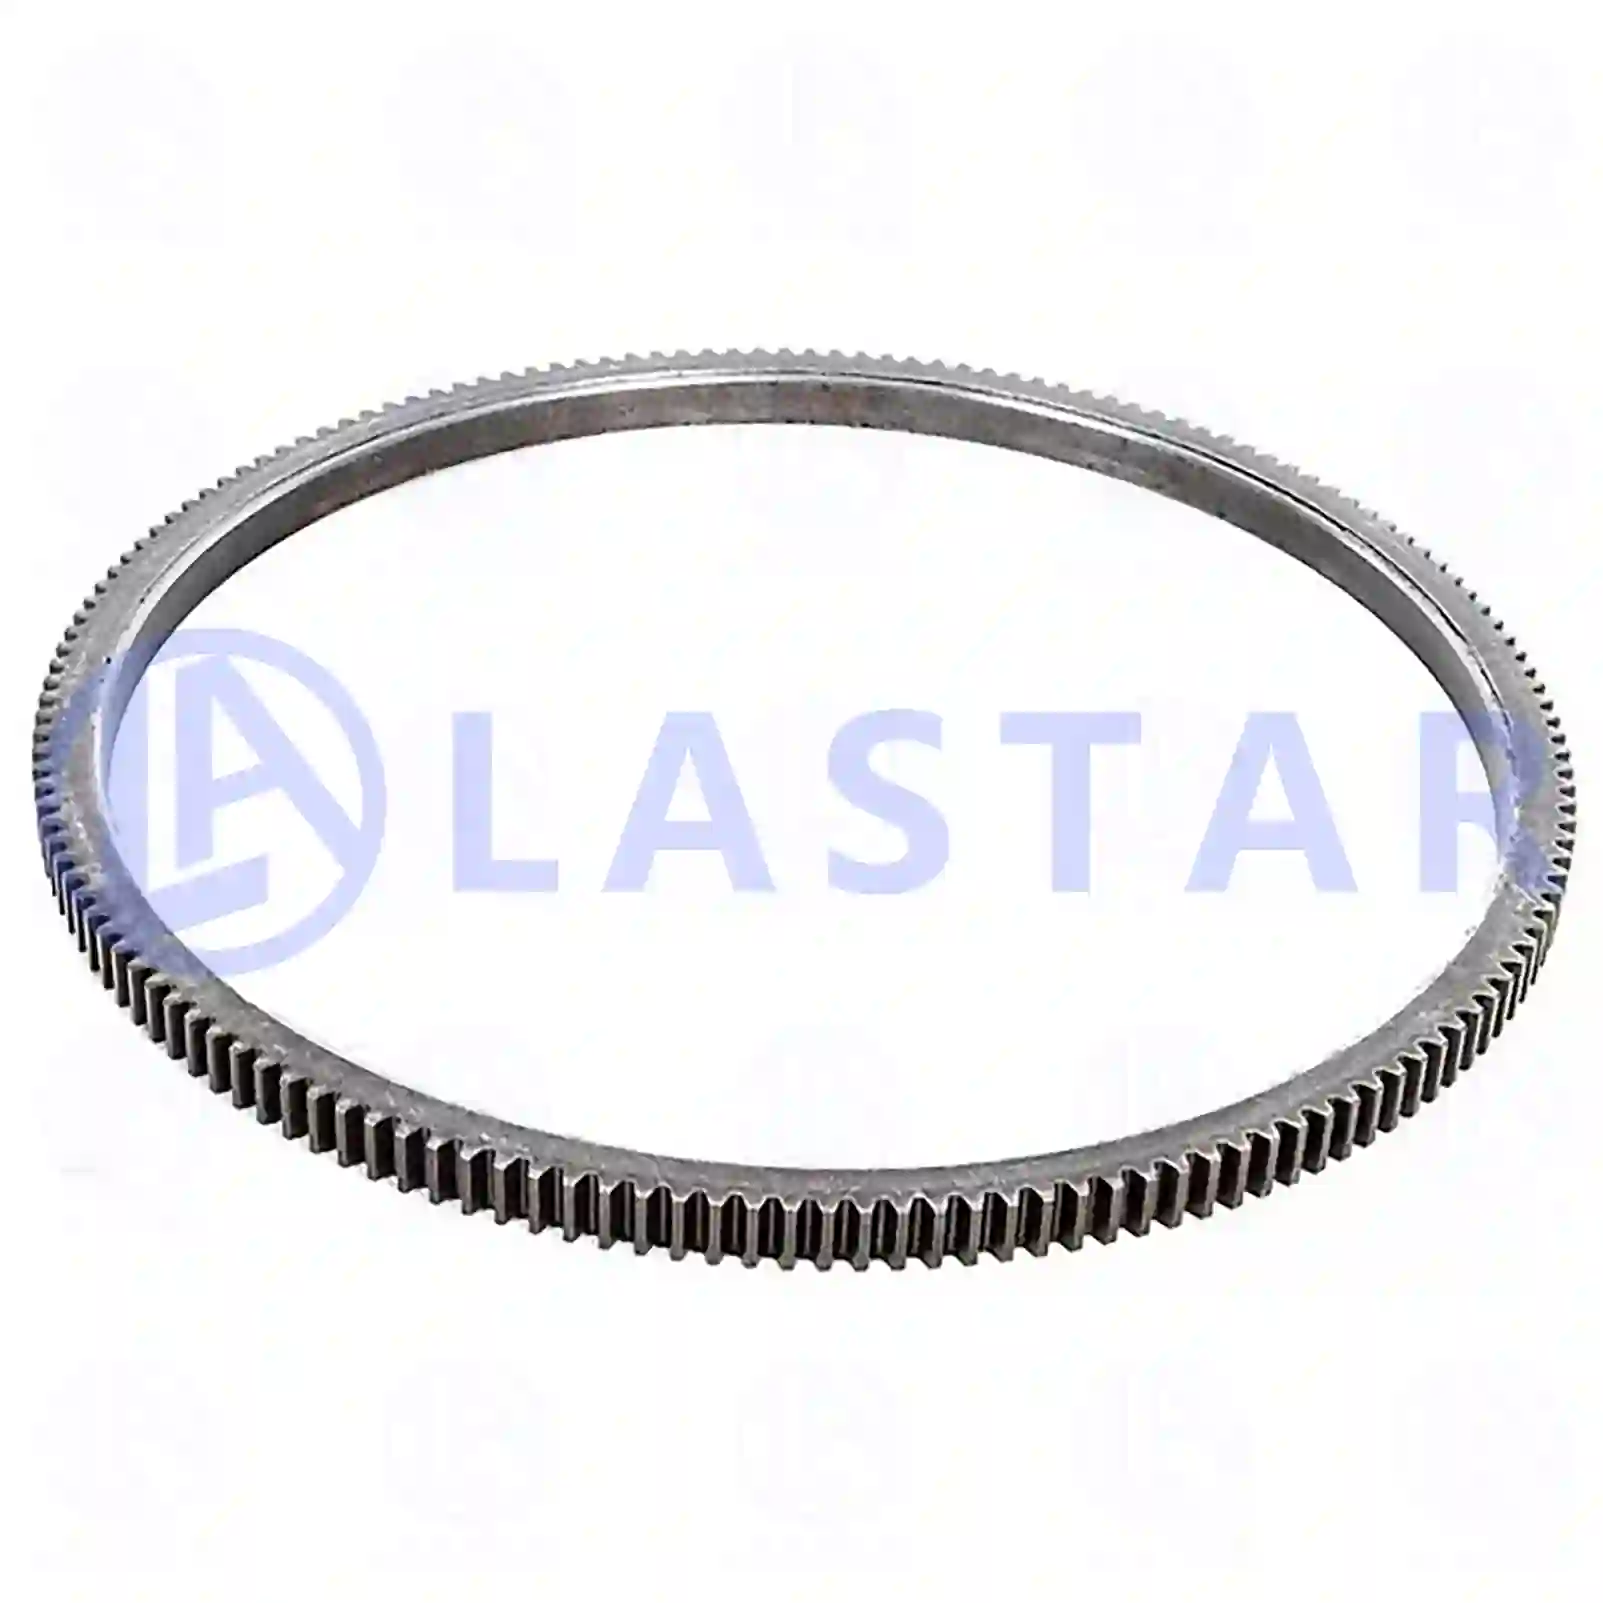 Ring gear, 77703880, 99433386, , ||  77703880 Lastar Spare Part | Truck Spare Parts, Auotomotive Spare Parts Ring gear, 77703880, 99433386, , ||  77703880 Lastar Spare Part | Truck Spare Parts, Auotomotive Spare Parts